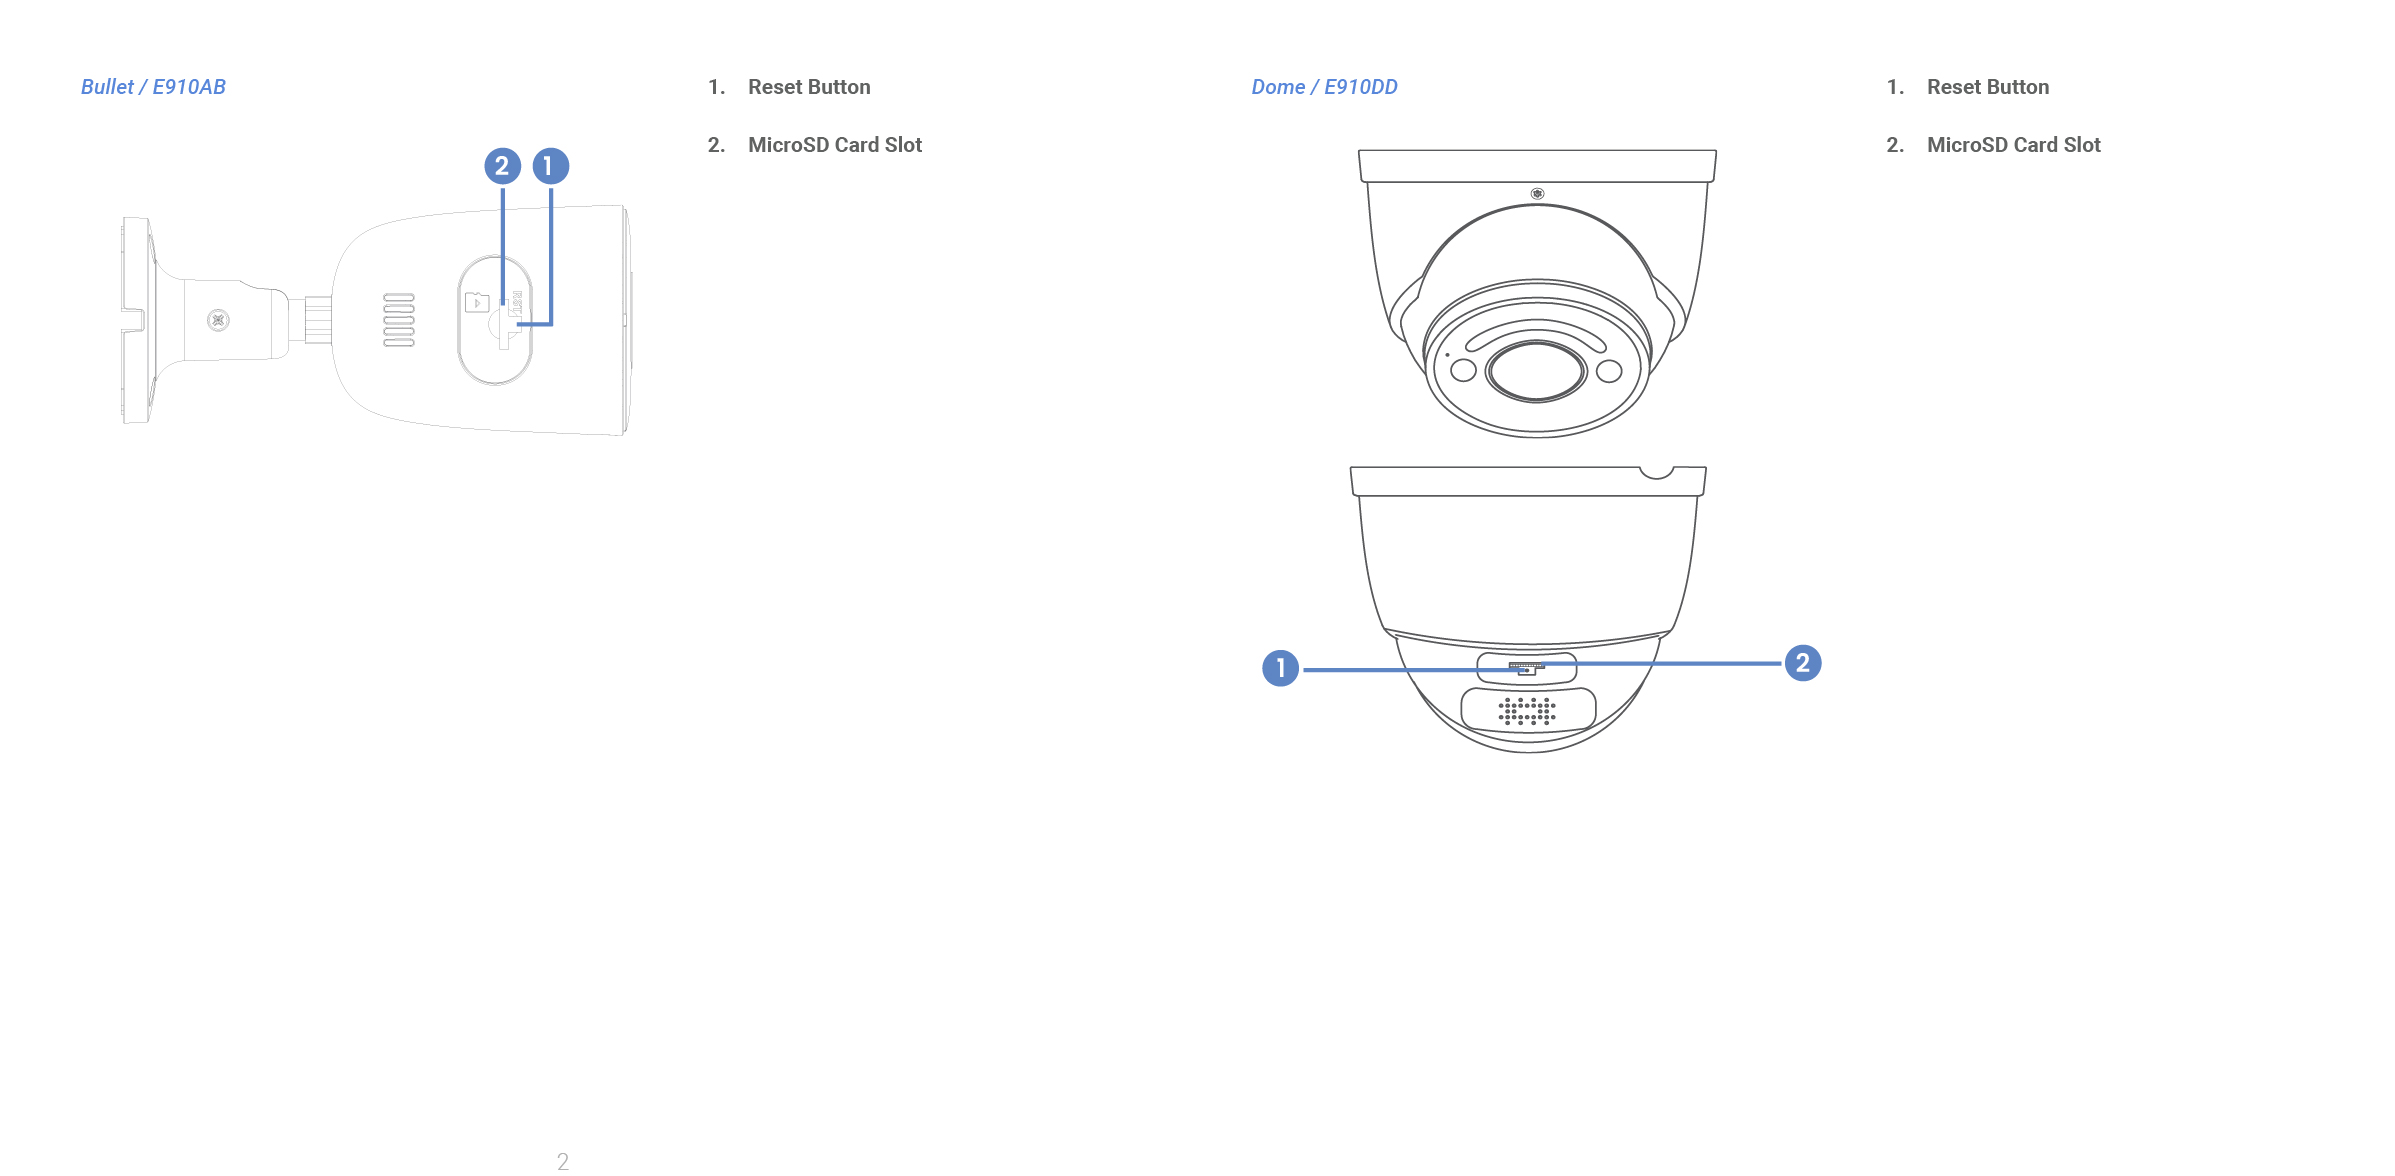 Diagram of cameras with MicroSD card slot and reset button labeled.